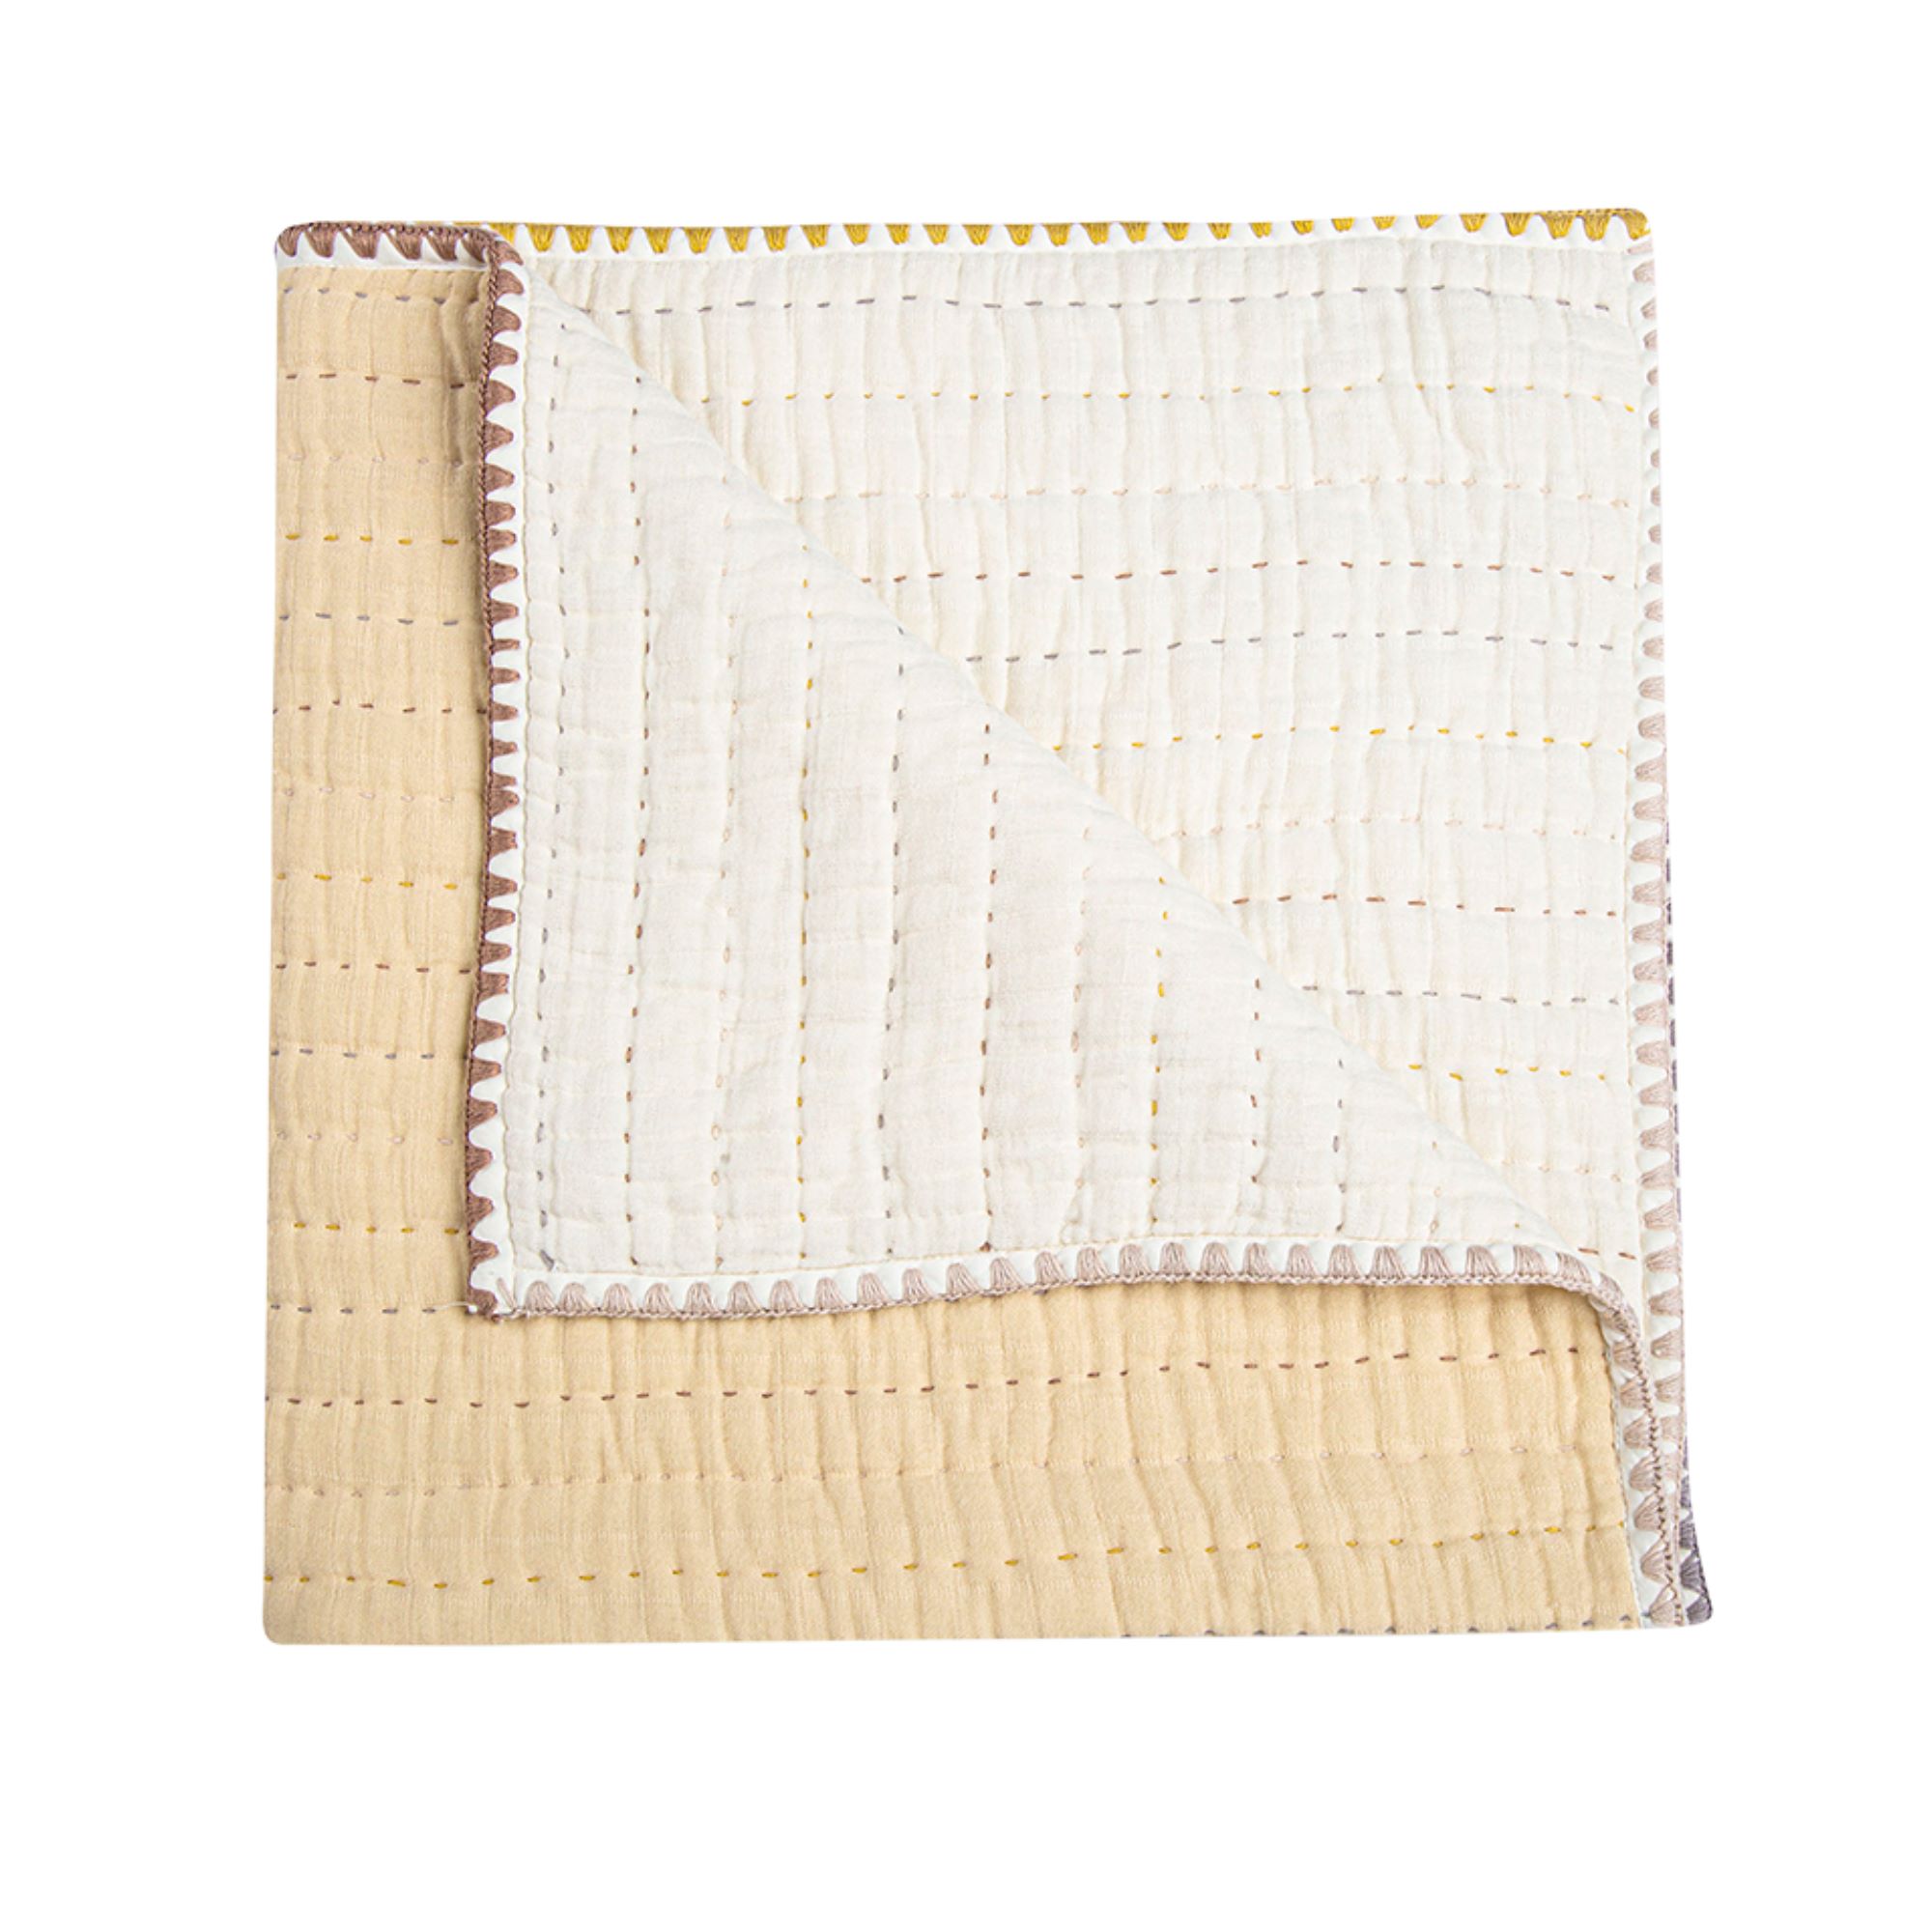 Beige quilted blanket on white background